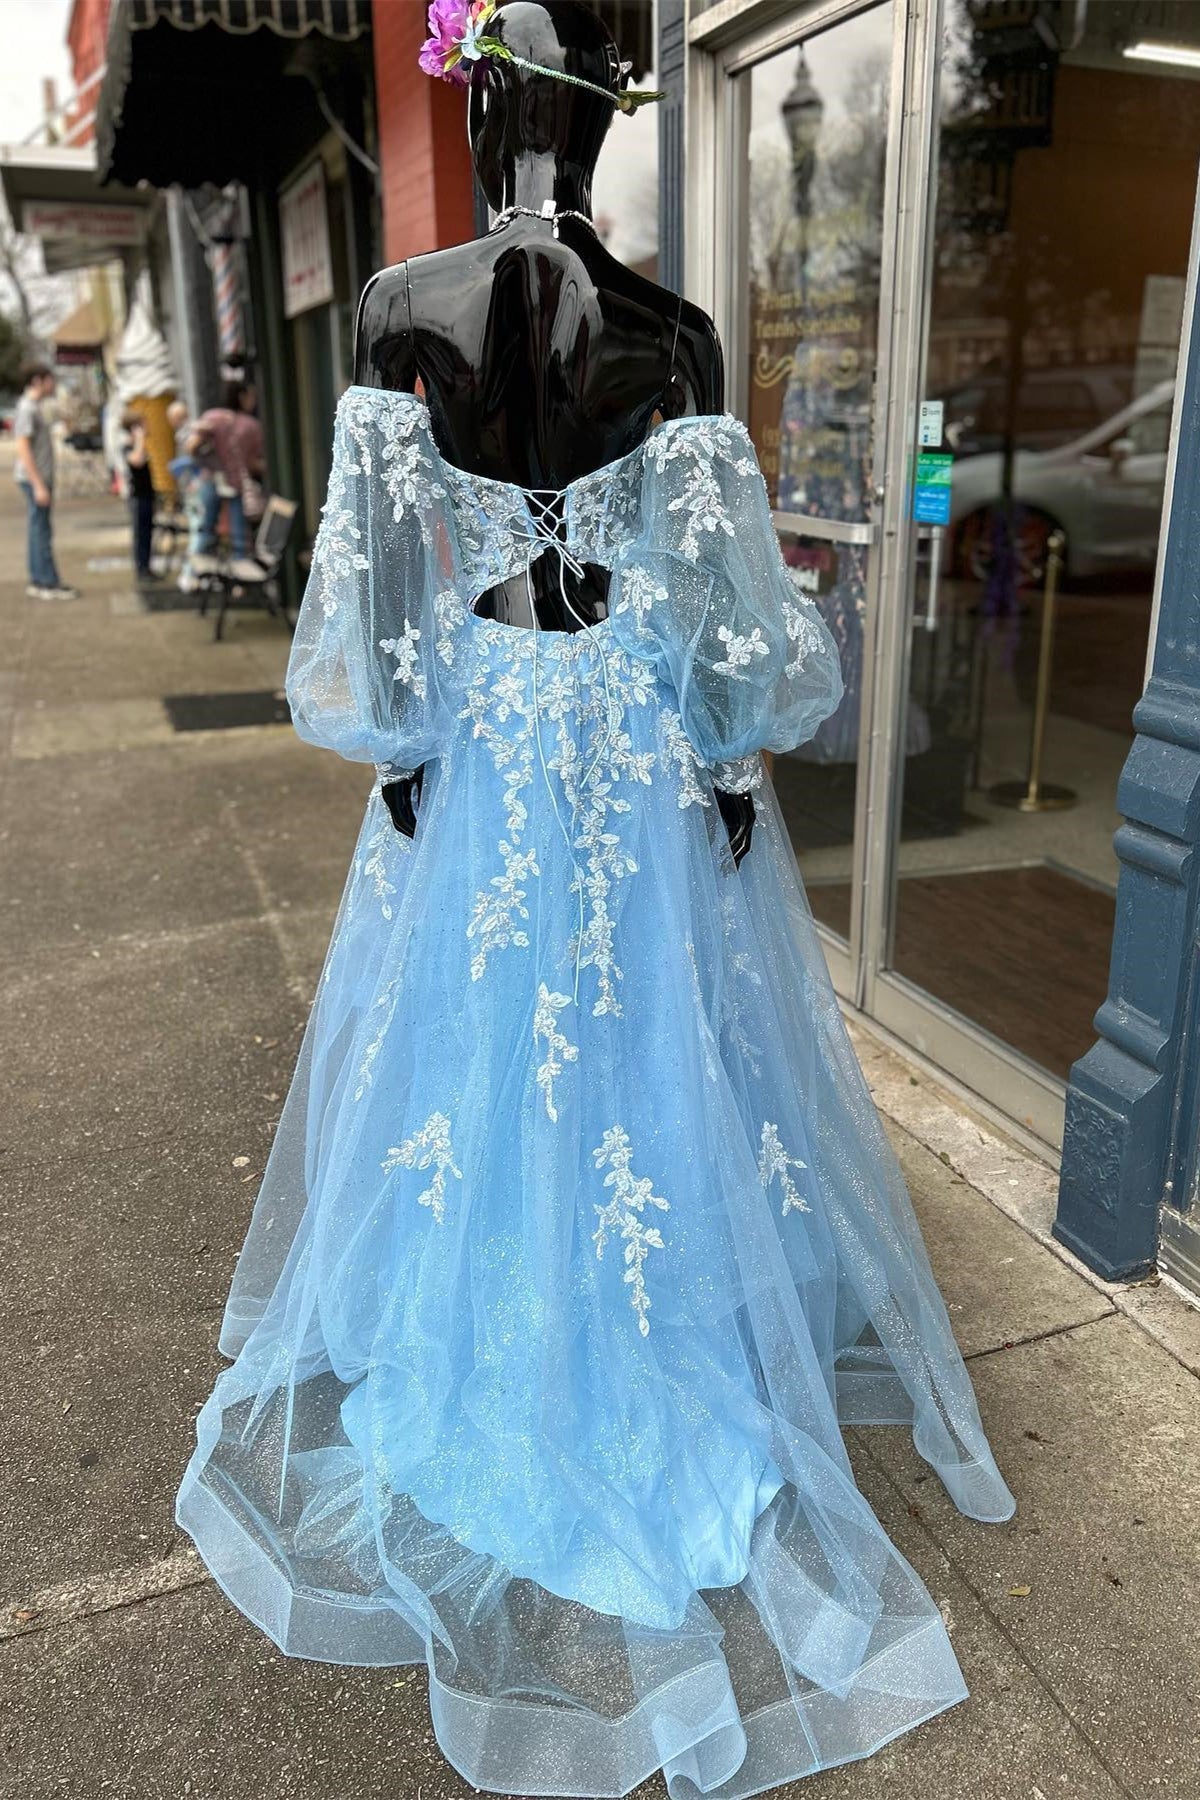 Ocean Blue Off Shoulder Mermaid Princess Prom Dresses 2022 With Beaded  Butterfly Organza And Backless Ball Gown 2023 Collection From Huang333,  $57.67 | DHgate.Com